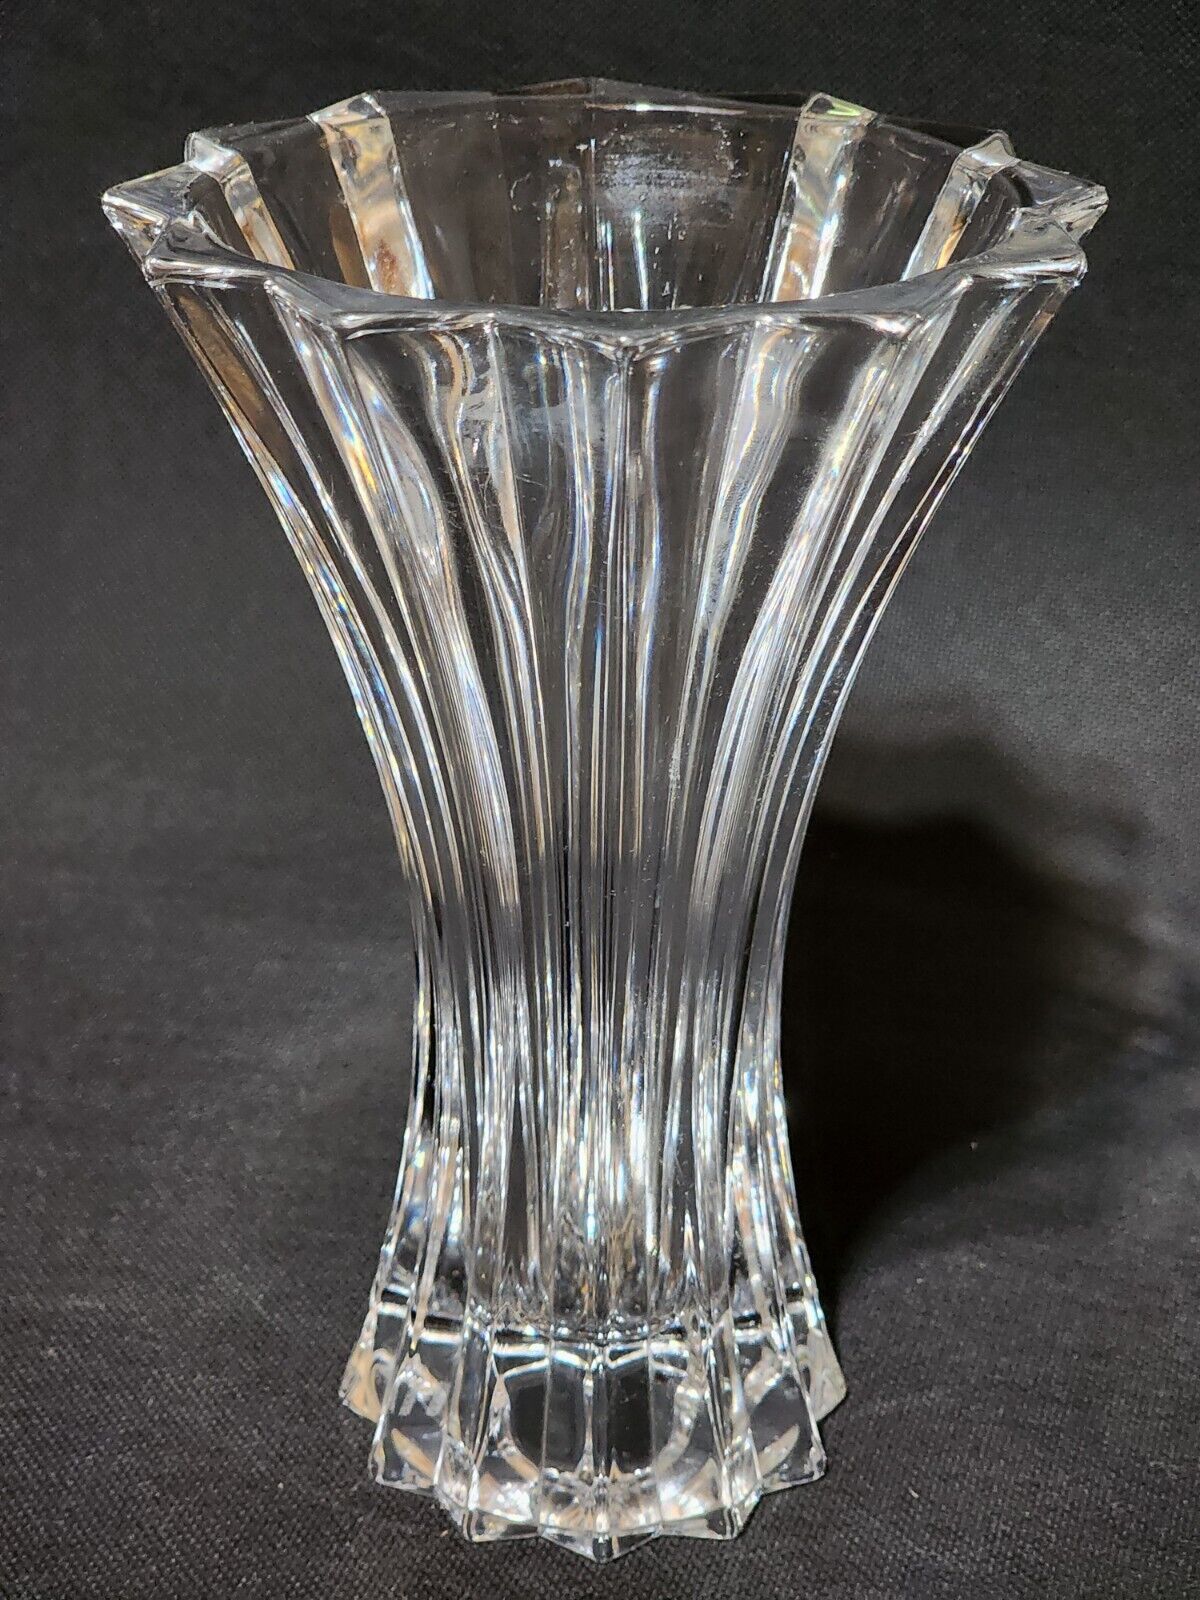 Primary image for NEAR MINT Marquis By WATERFORD 7" Crystal Vase ELLISTON Pattern Germany - SIGNED